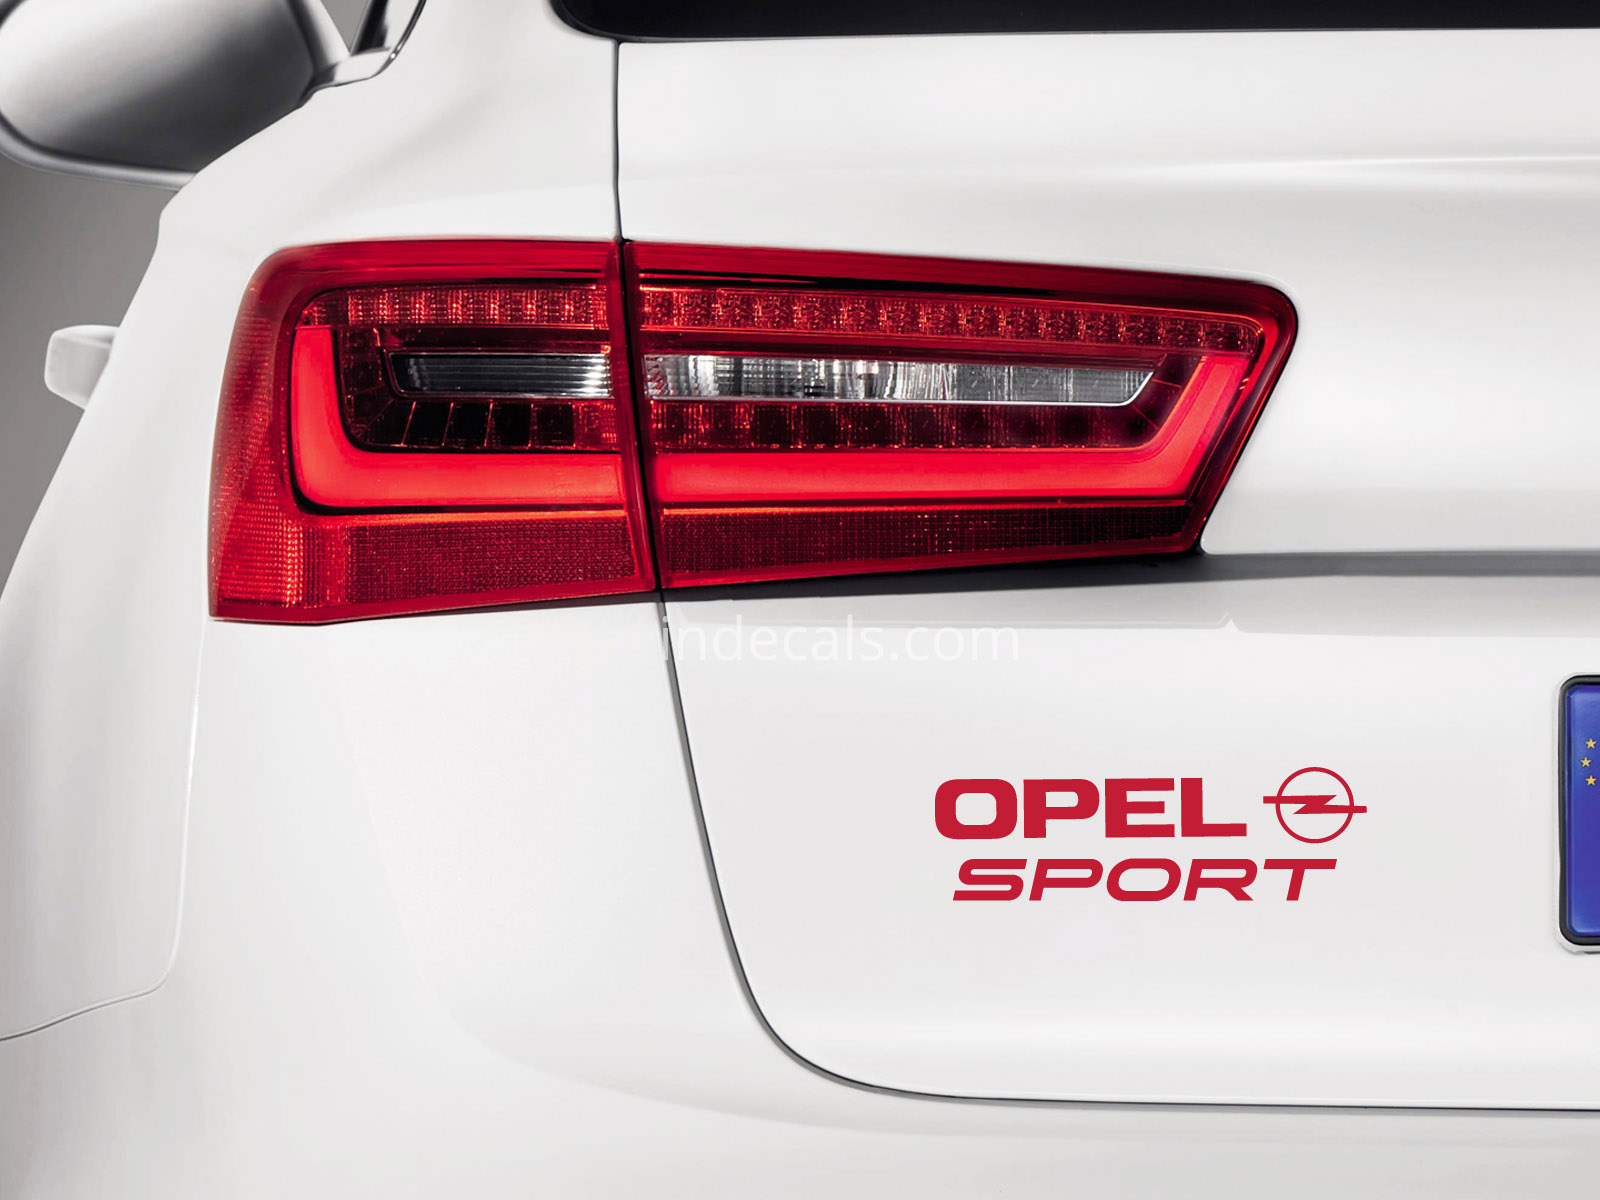 1 x Opel Sports Sticker for Trunk - Red